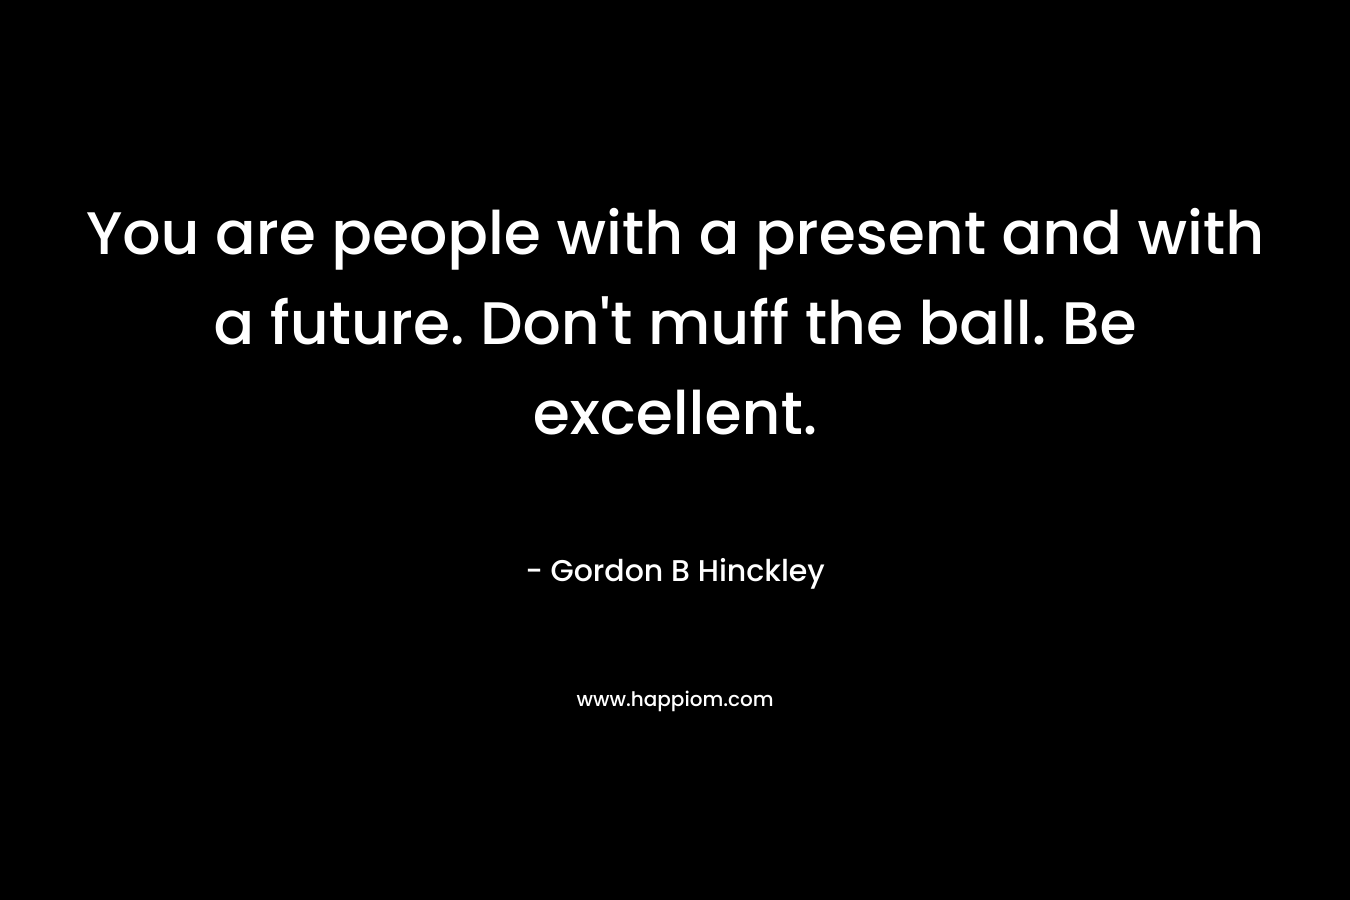 You are people with a present and with a future. Don’t muff the ball. Be excellent. – Gordon B Hinckley